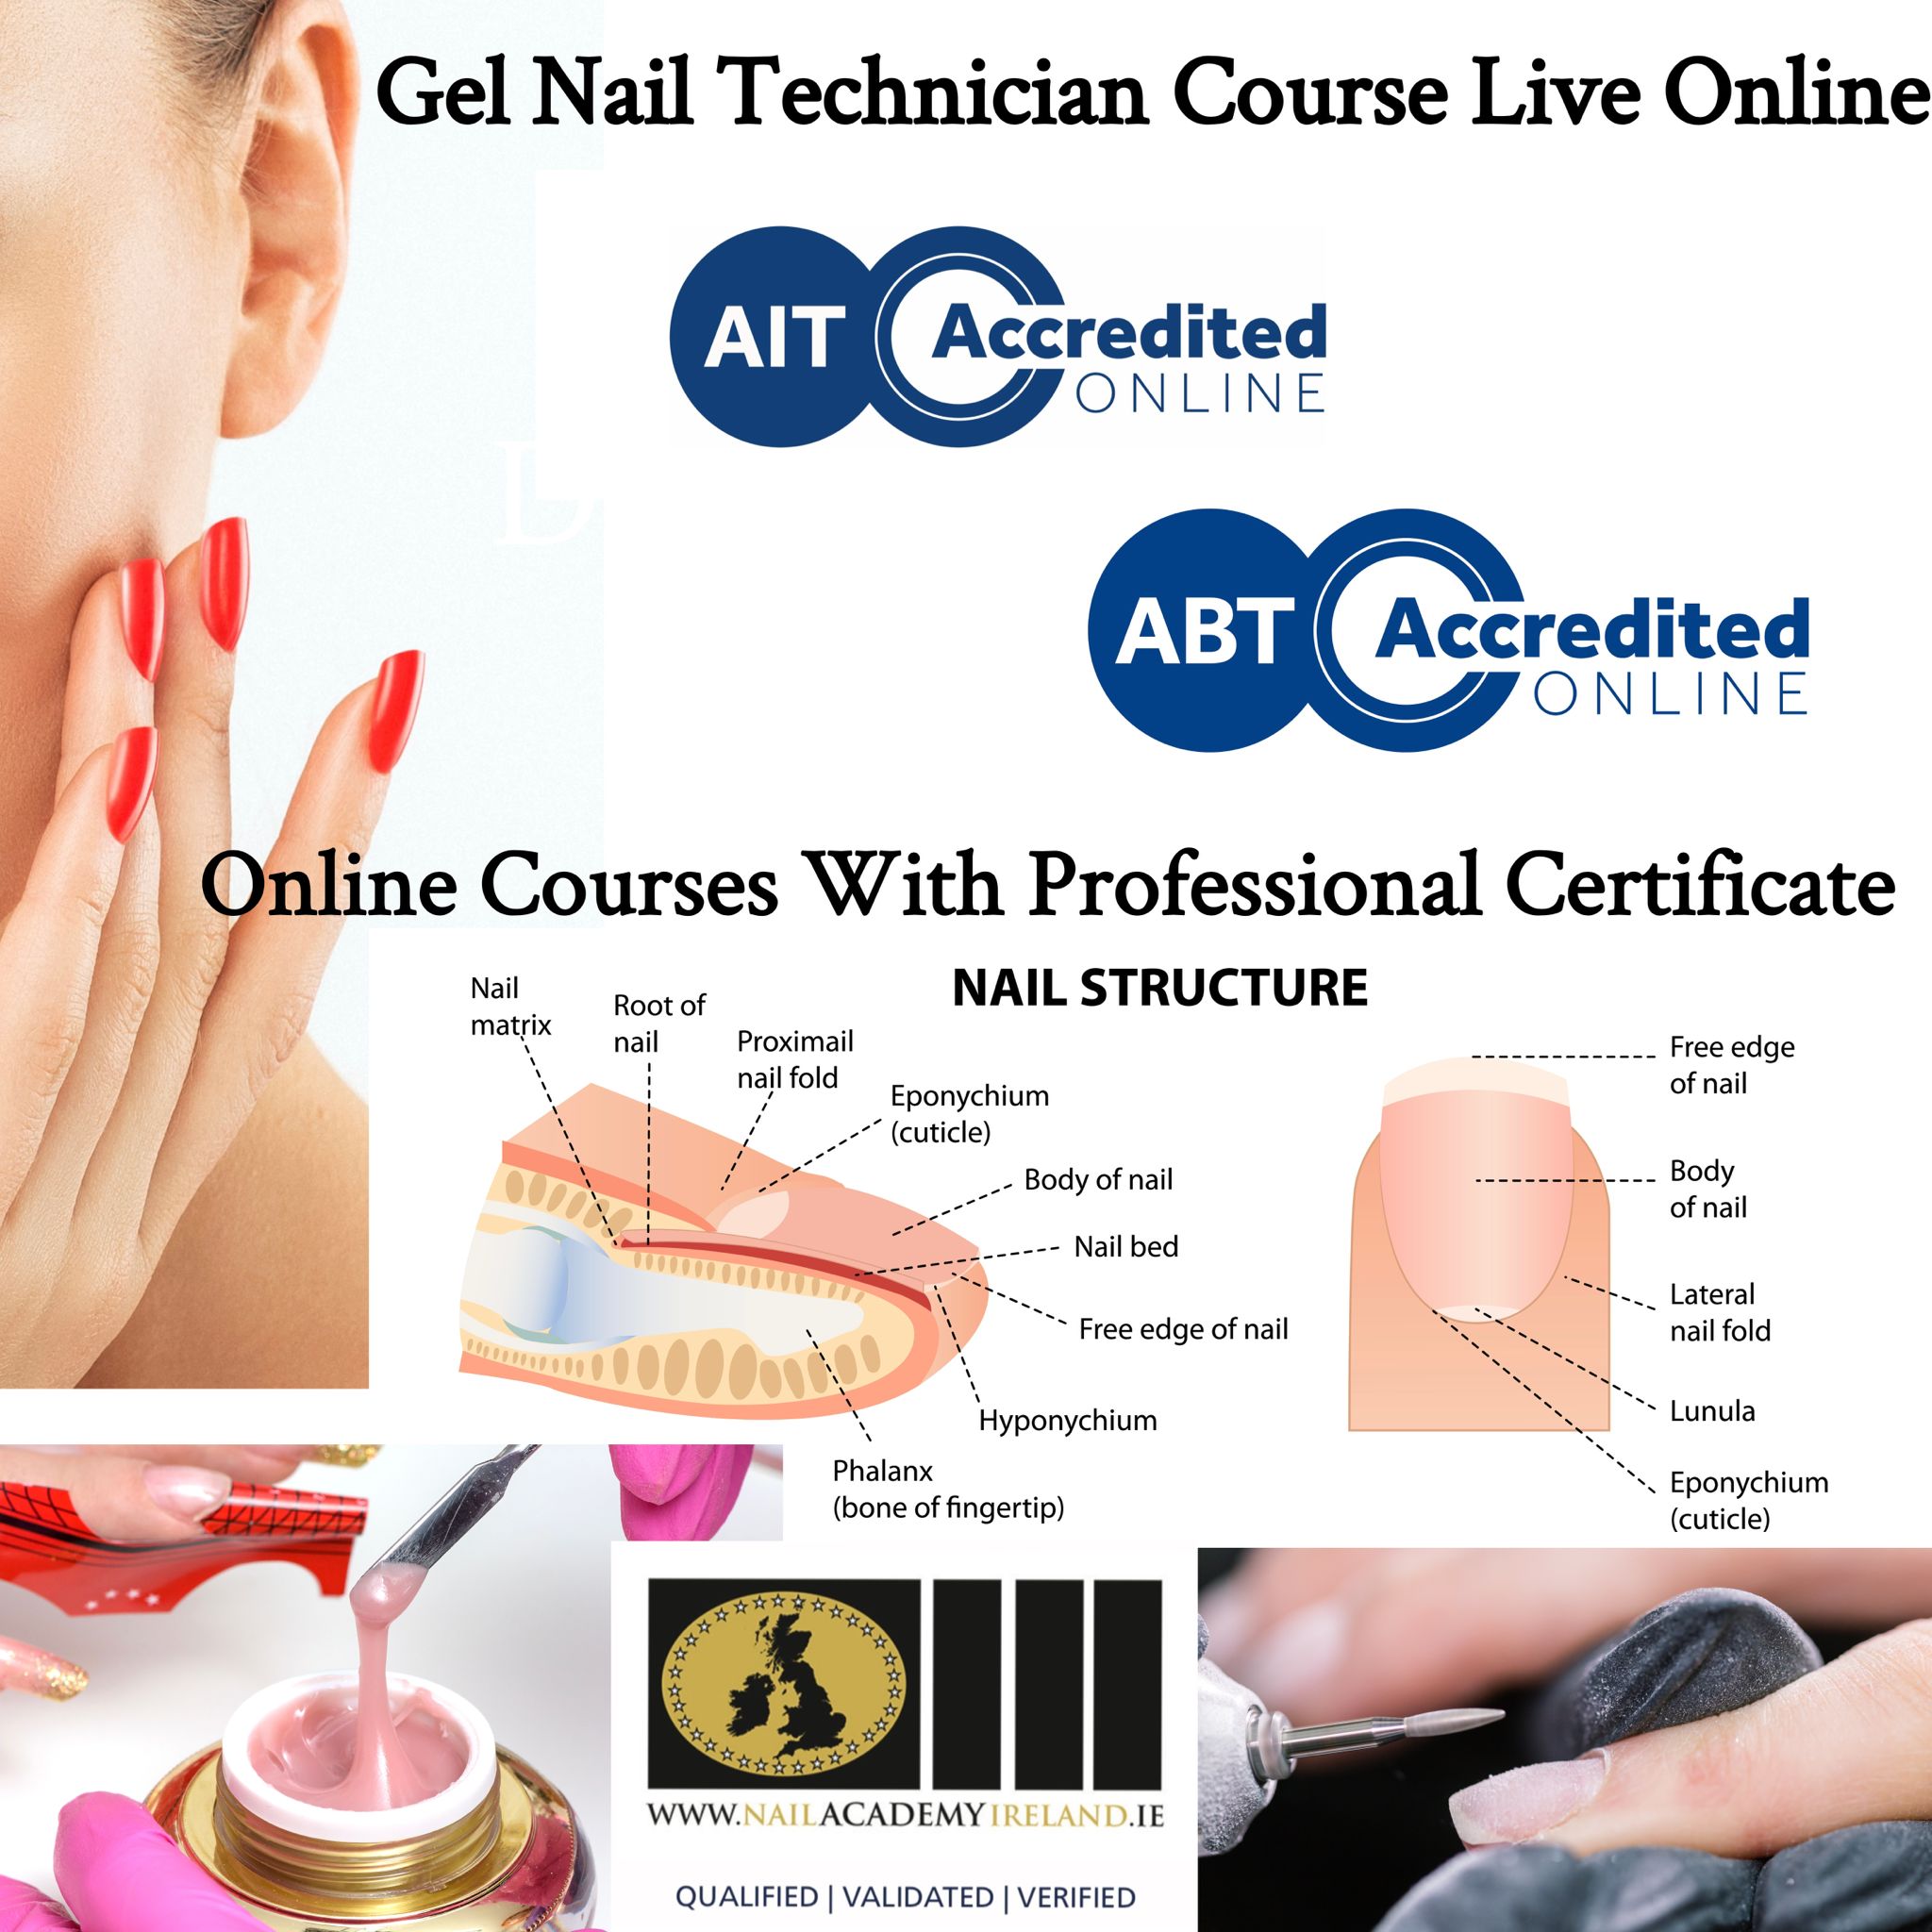 Gel Nail Technician Course Online / October 02 and Oct 03 and Oct 09 and 10. This Course is run over four evenings 7pm until 9pm each evening live. ABT-AIT Accredited. ( €74.75 each evening )